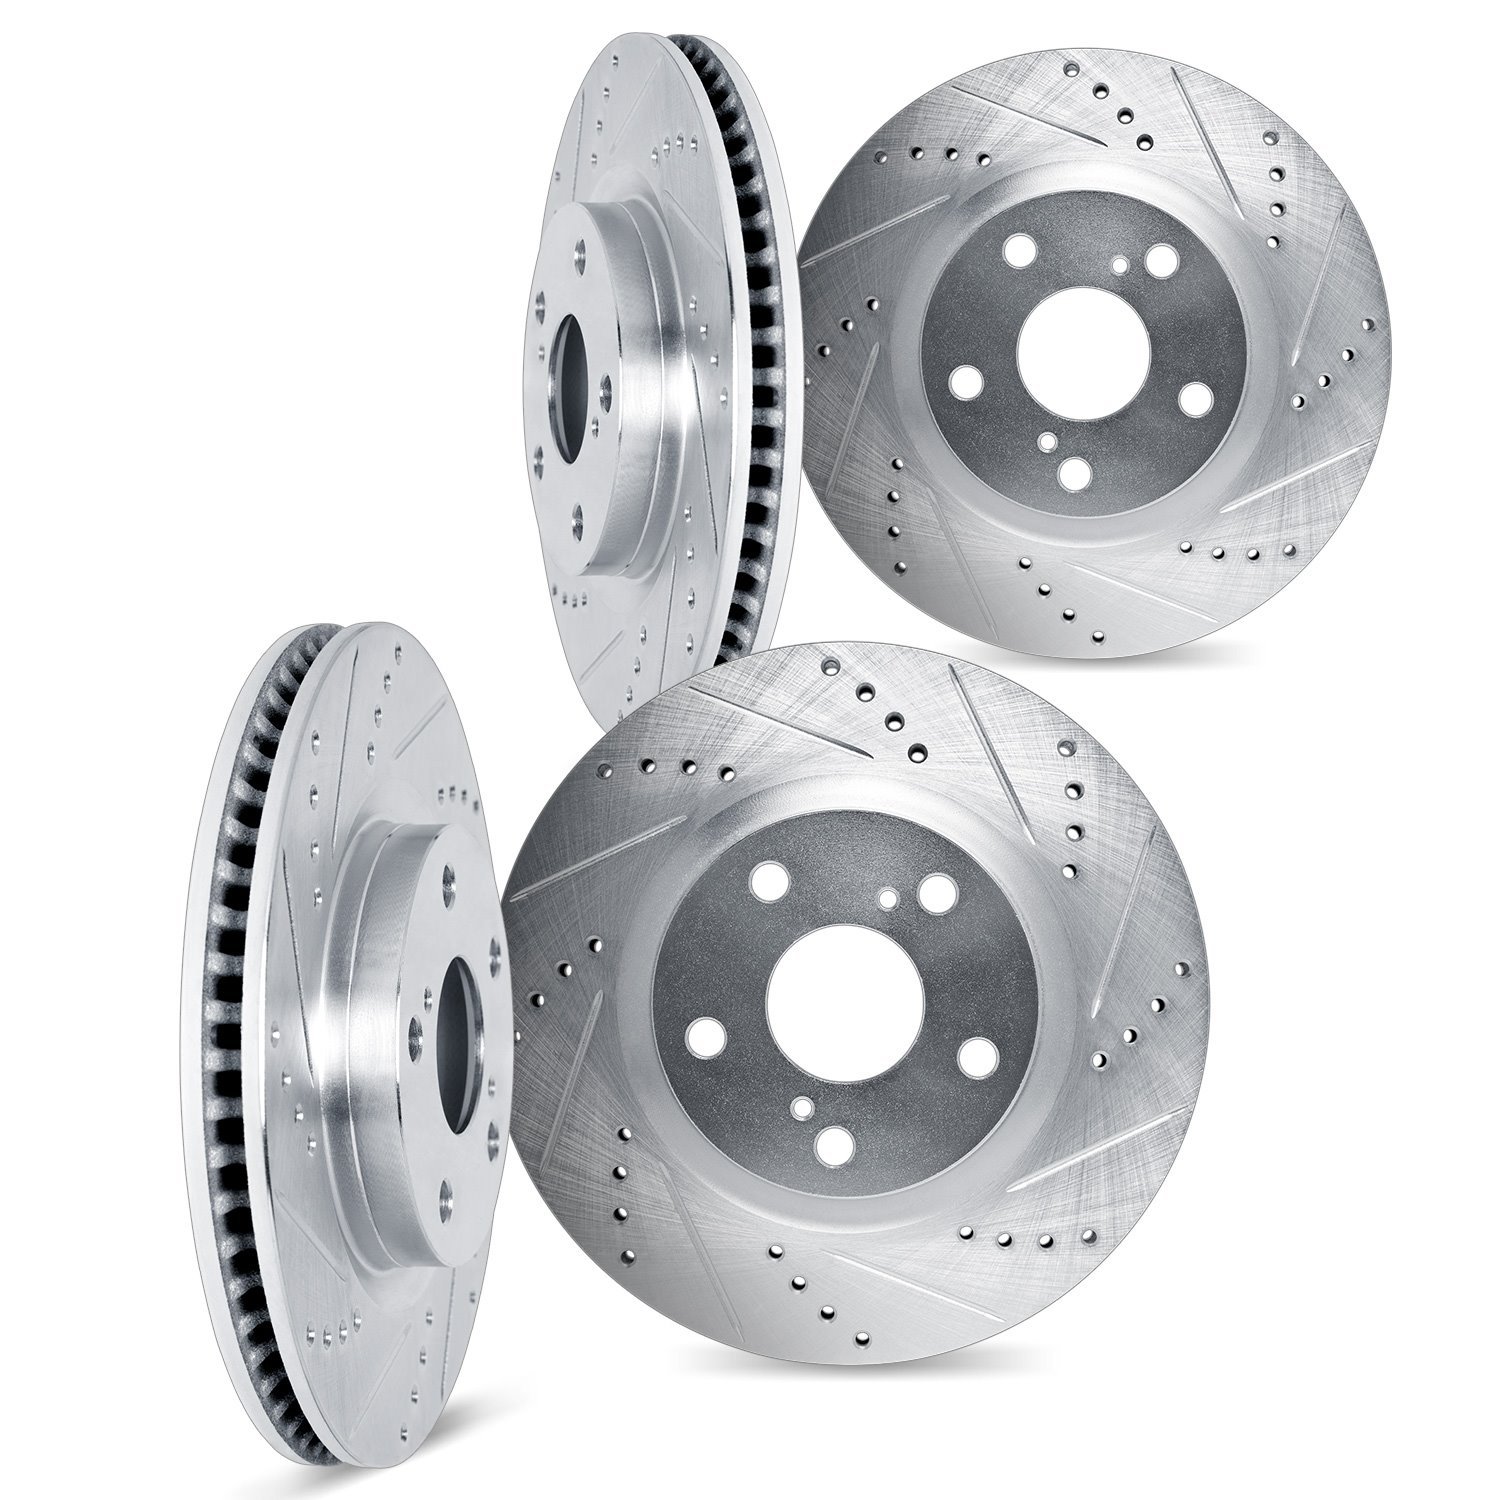 7004-67083 Drilled/Slotted Brake Rotors [Silver], Fits Select Infiniti/Nissan, Position: Front and Rear